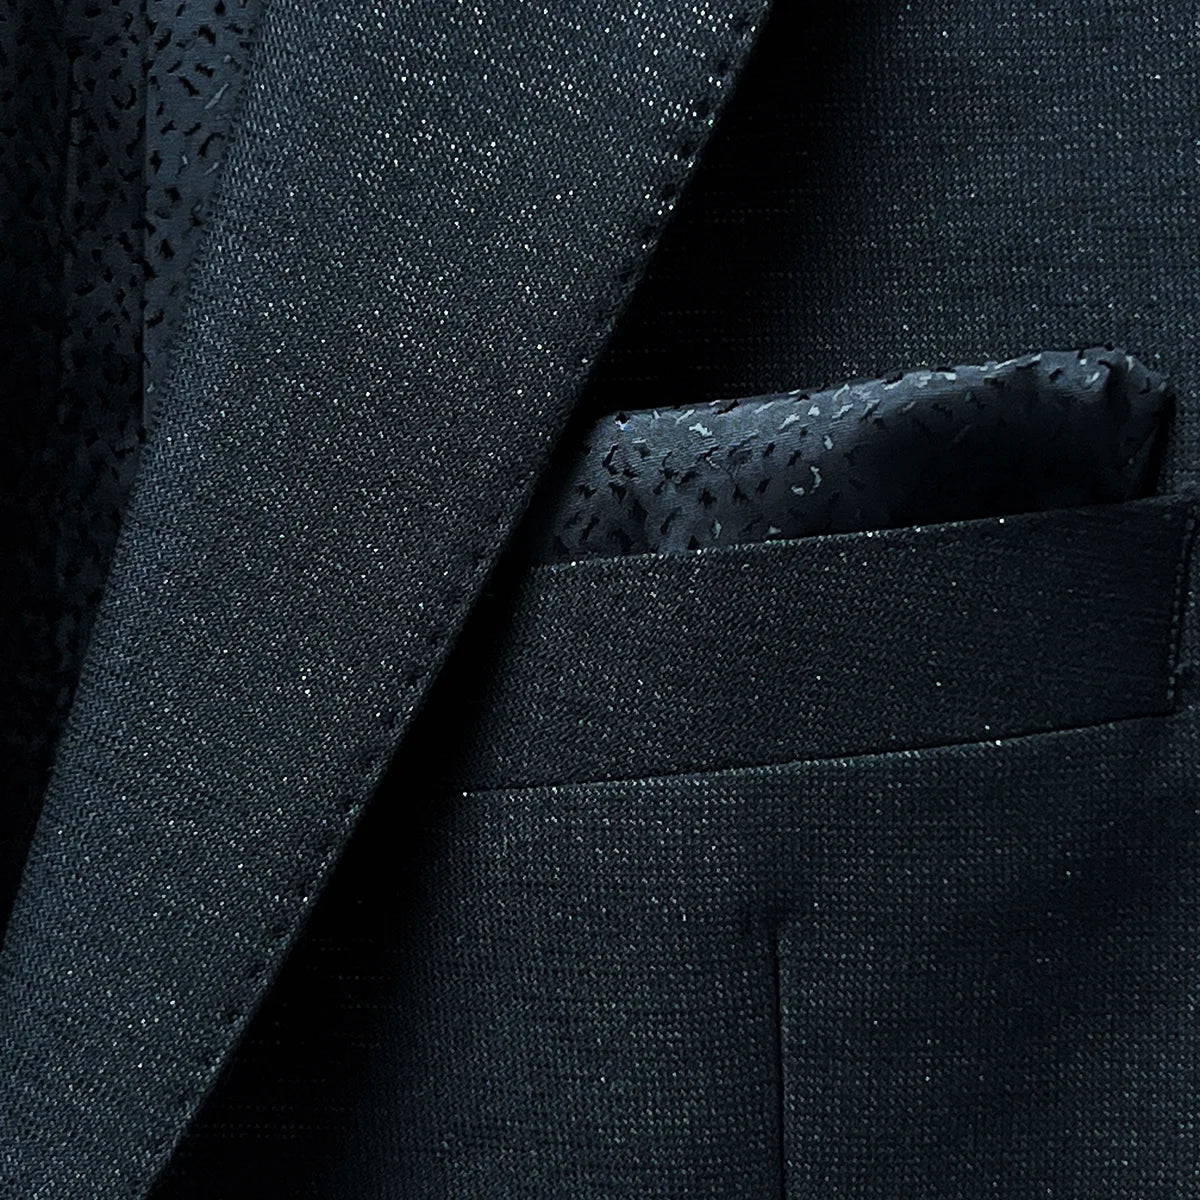 The built-in pocket square on the westwood hart men's shiny black glitter tuxedo jacket, a distinguished feature for formalwear occasions.